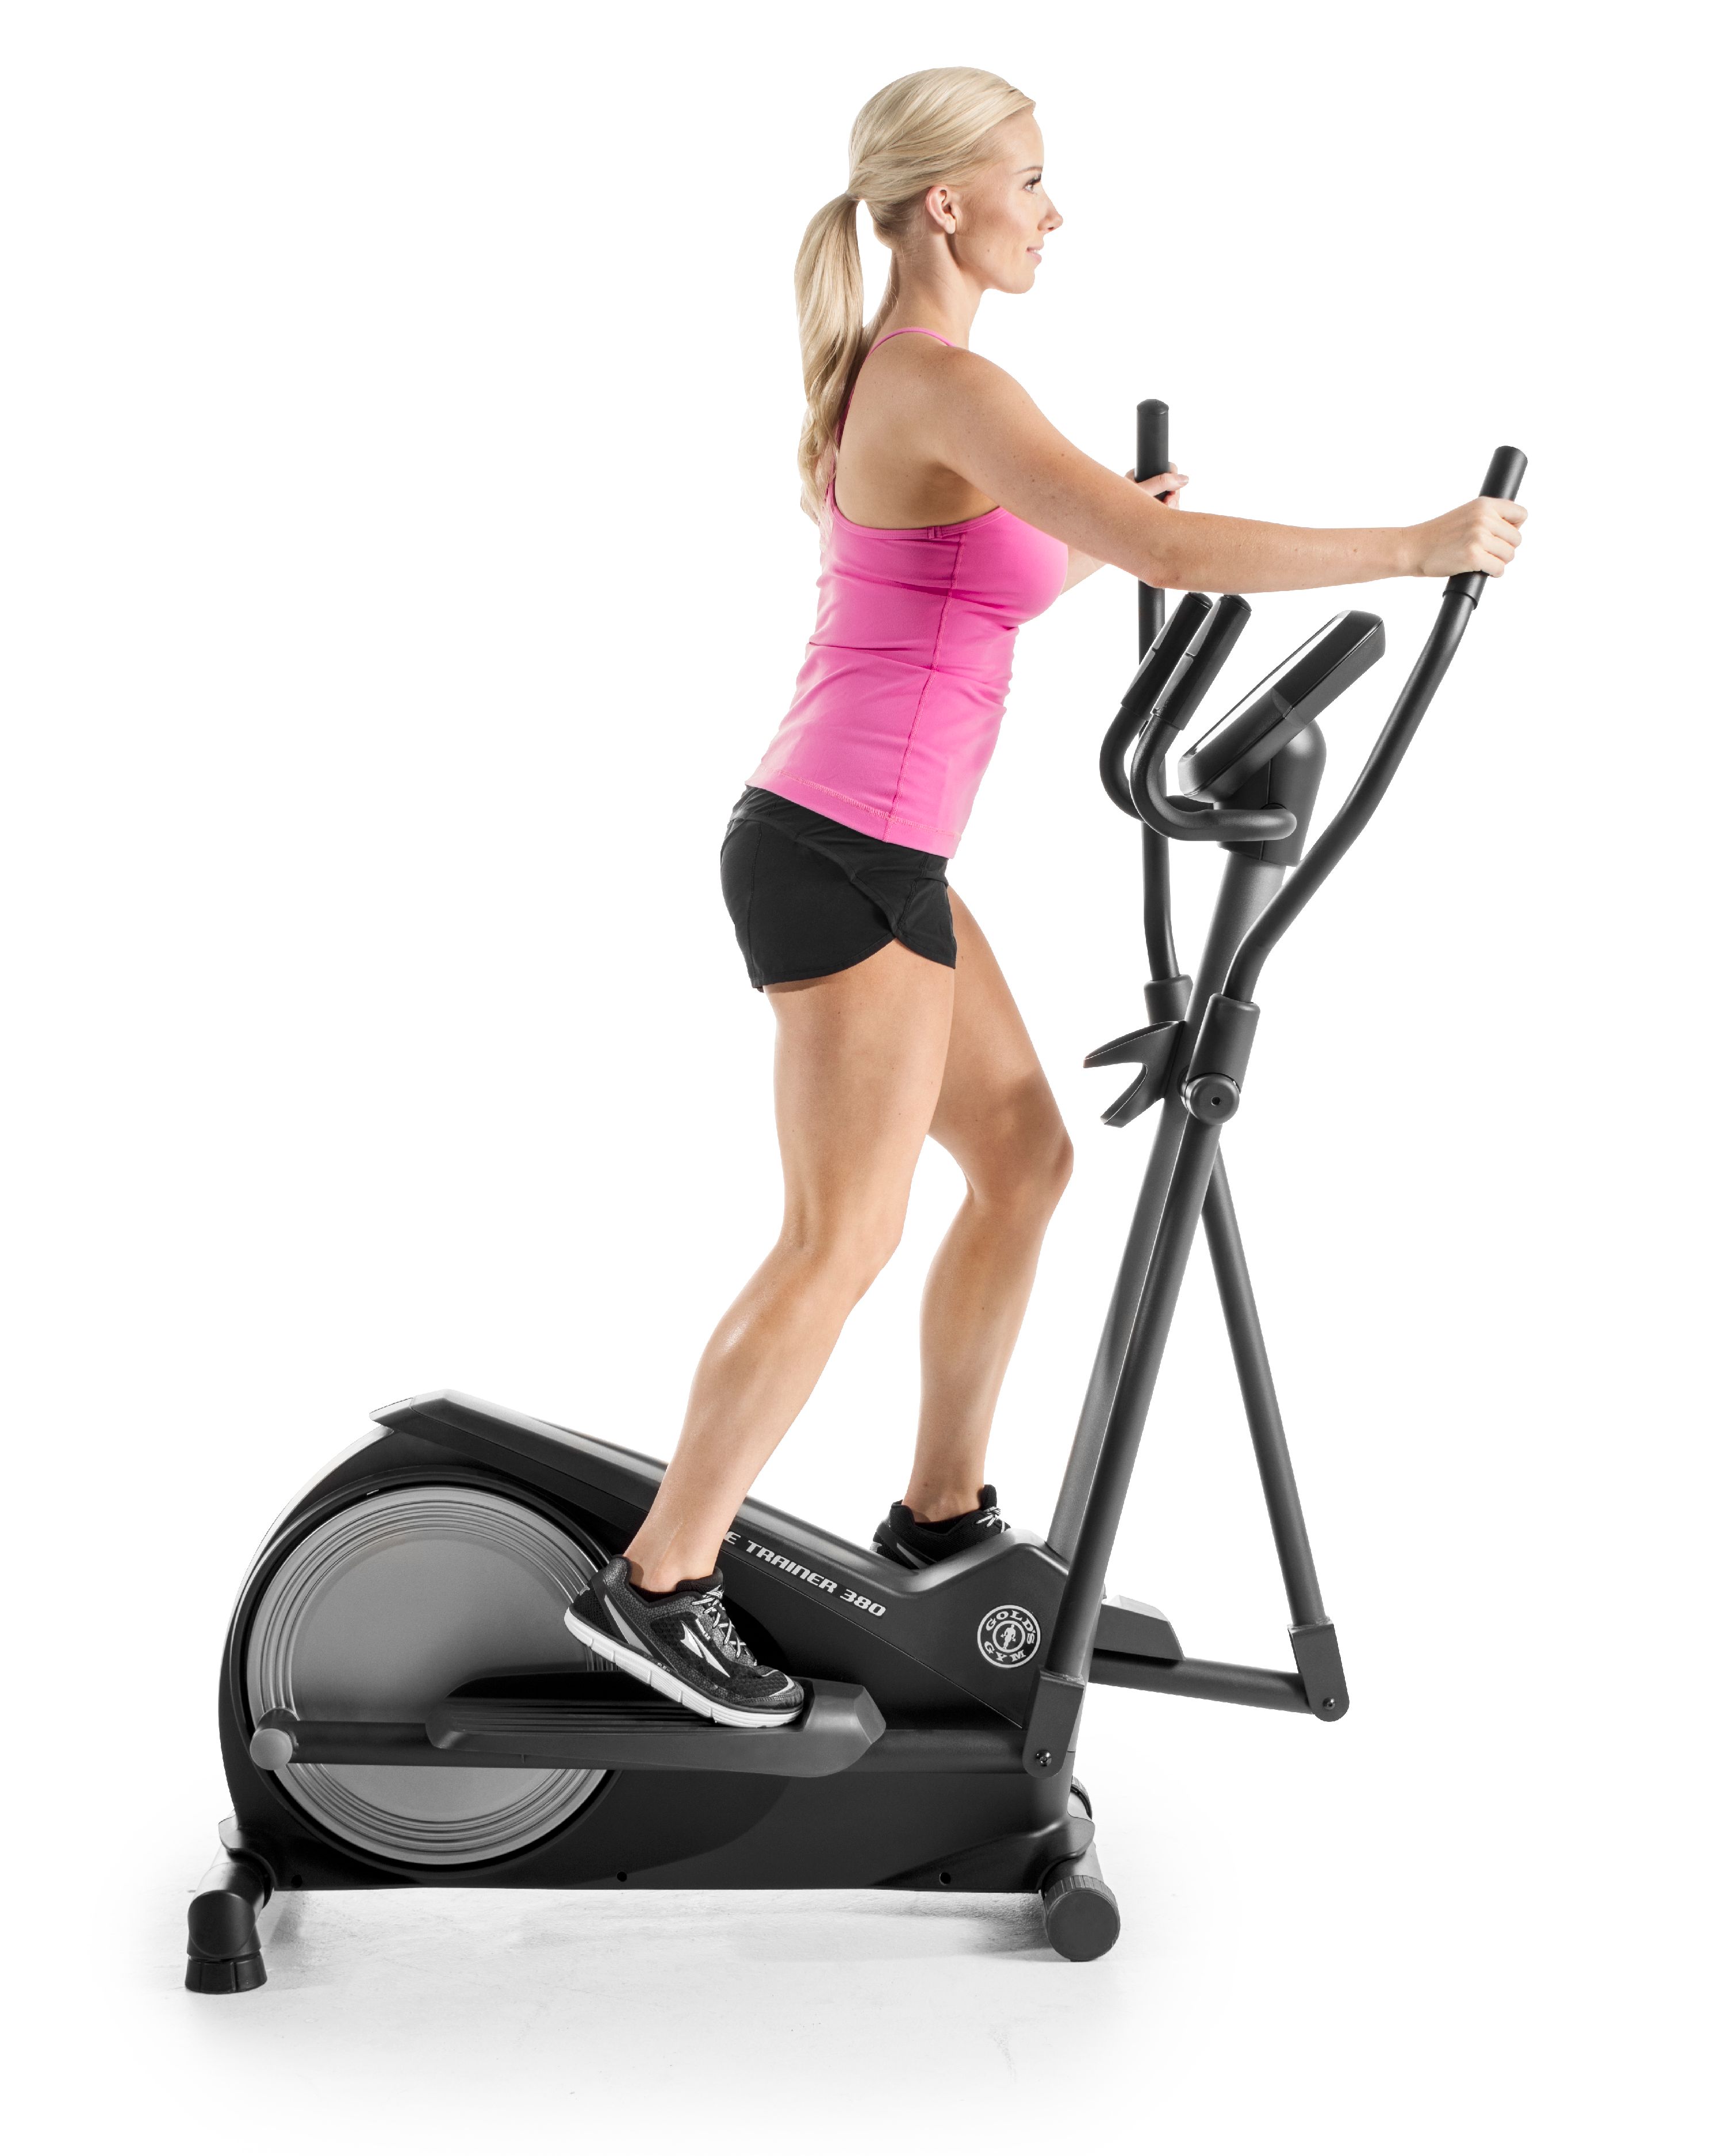 Gold's Gym Stride Trainer 380 Elliptical, iFit Coach Compatible - image 4 of 9